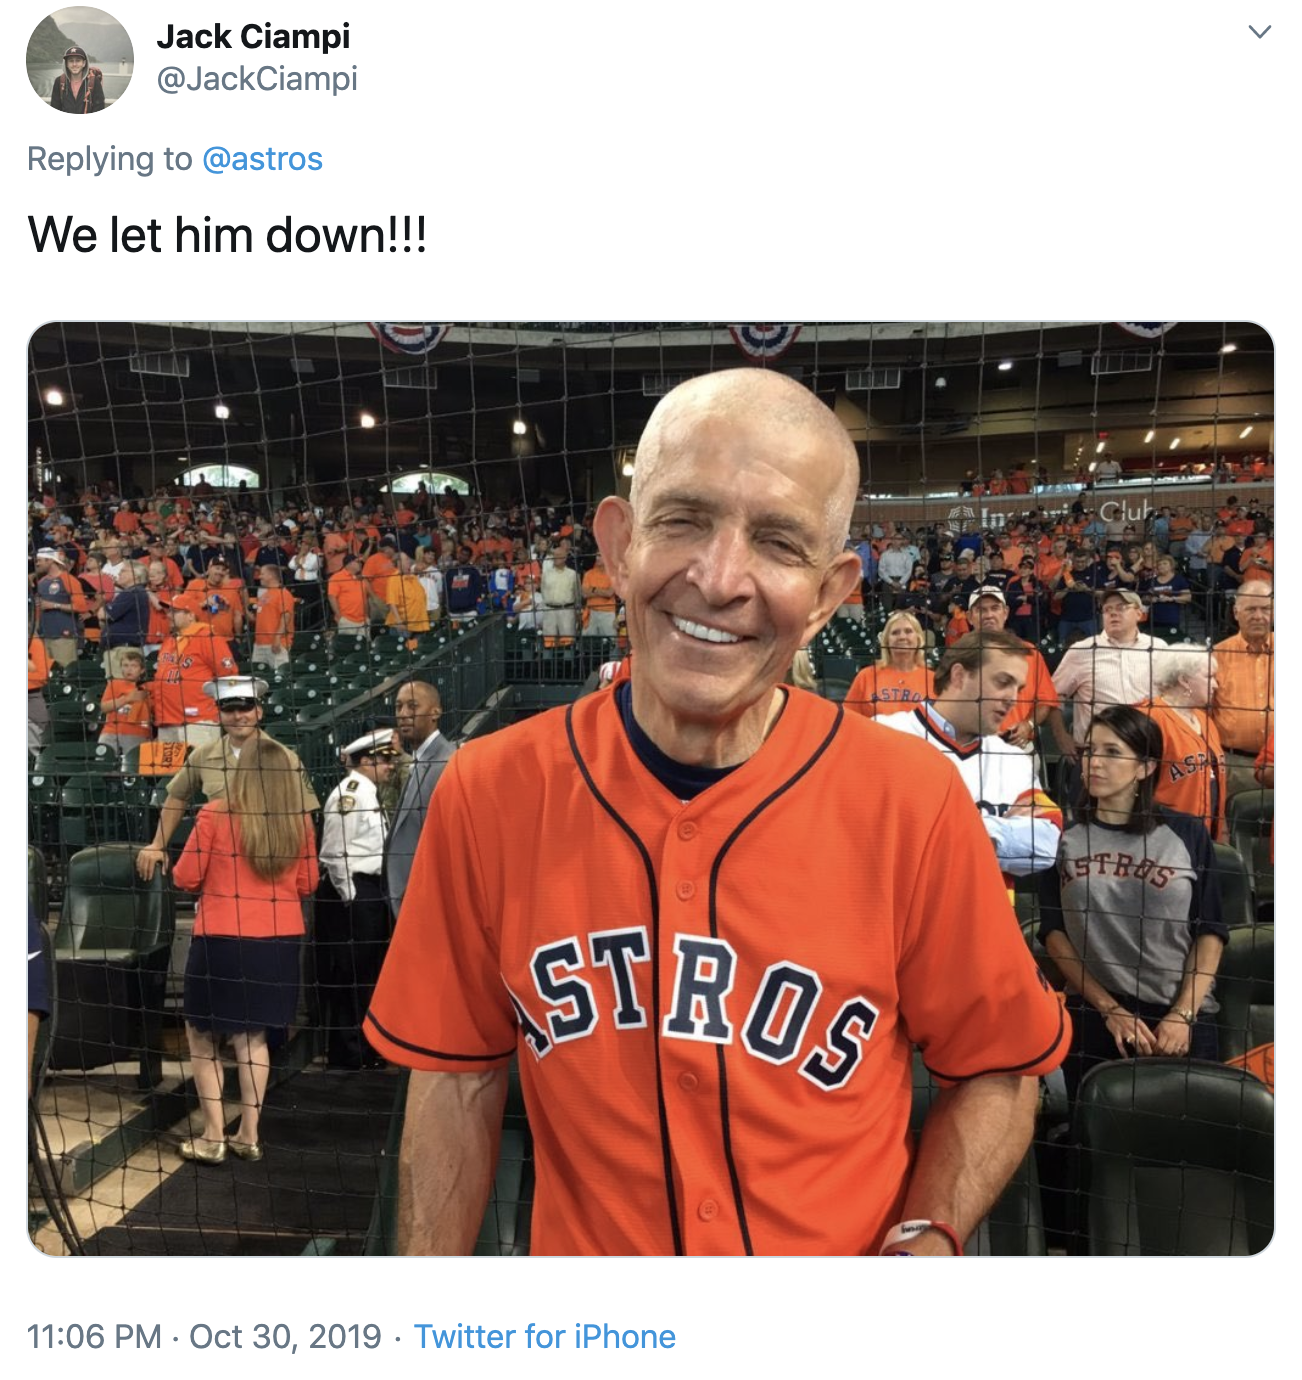 Memes, Houston celebrities react to Astros losing the World Series